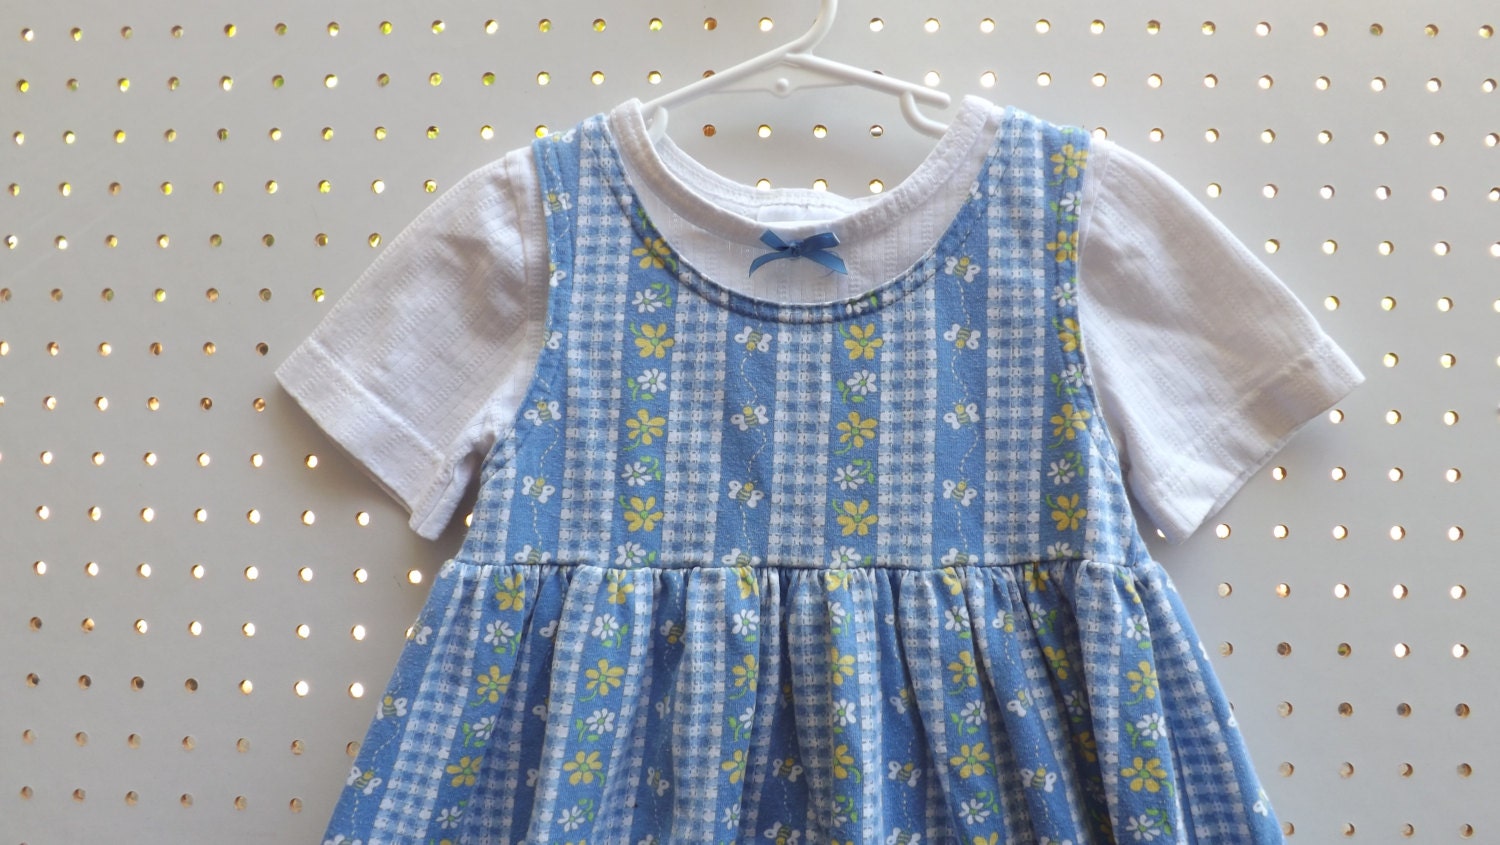 90s Kids Clothes. Vintage Dresses. Vintage by SeptemberButterfly